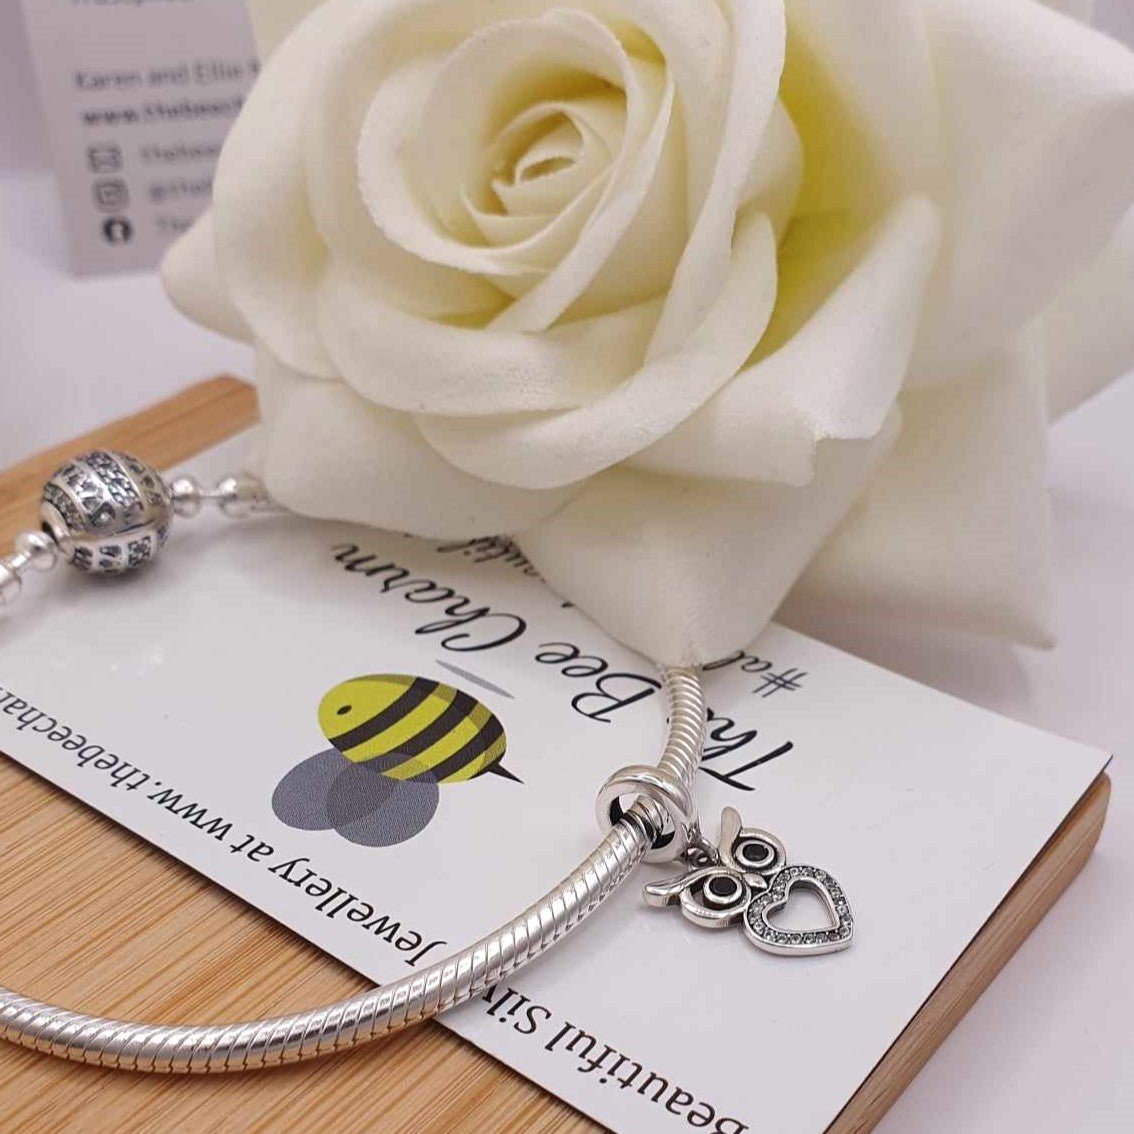 Wise Owl Charm - The Bee Charm